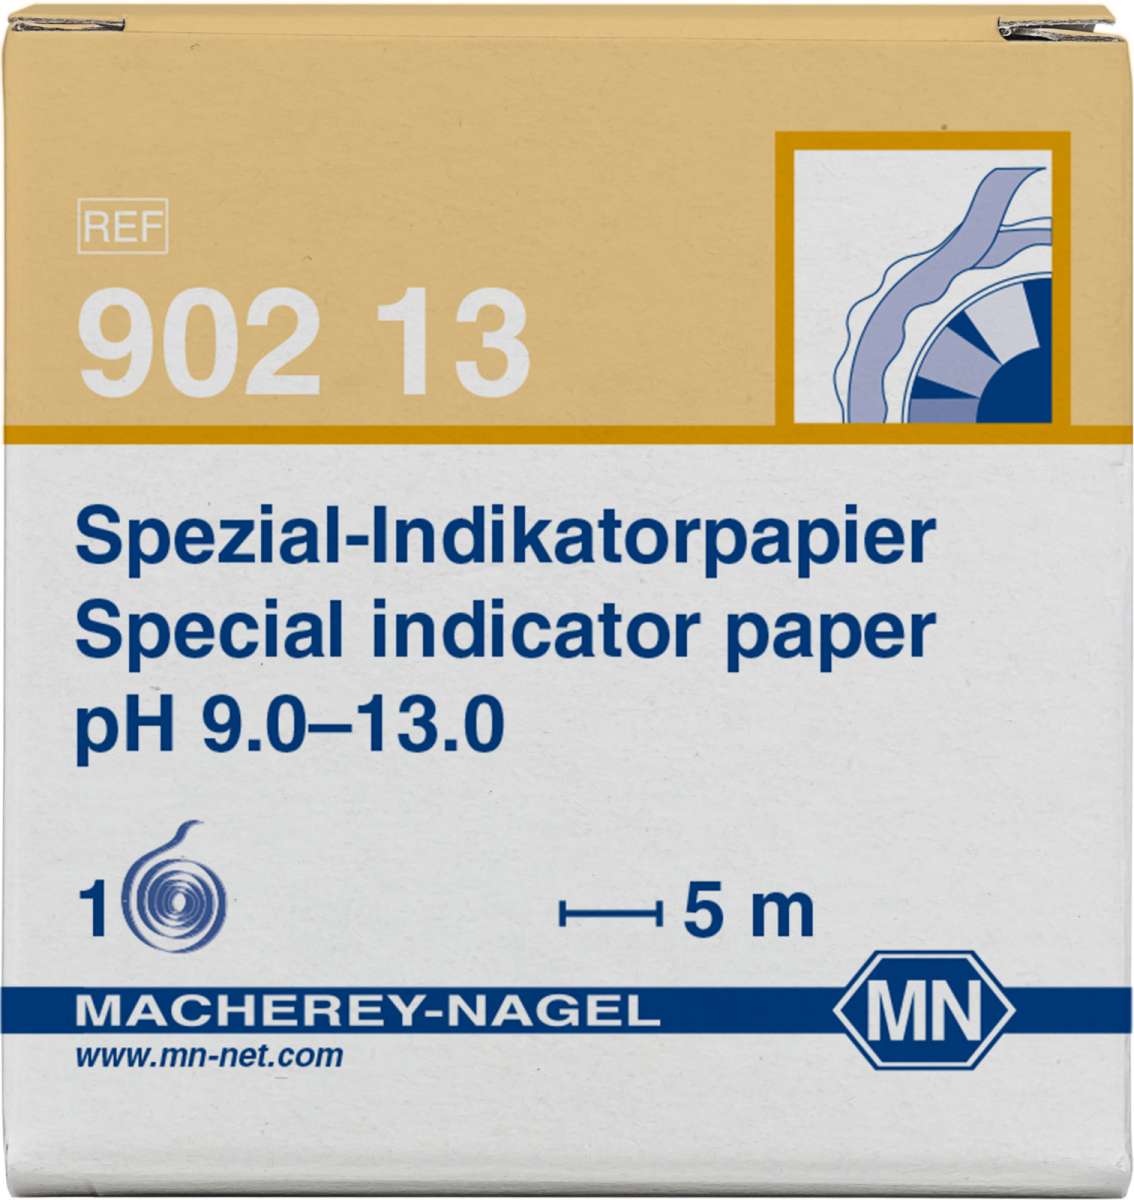 Refill pack for Special indicator paper pH 9.0 to 13.0 (3 reels of 5m length and 7mm width)